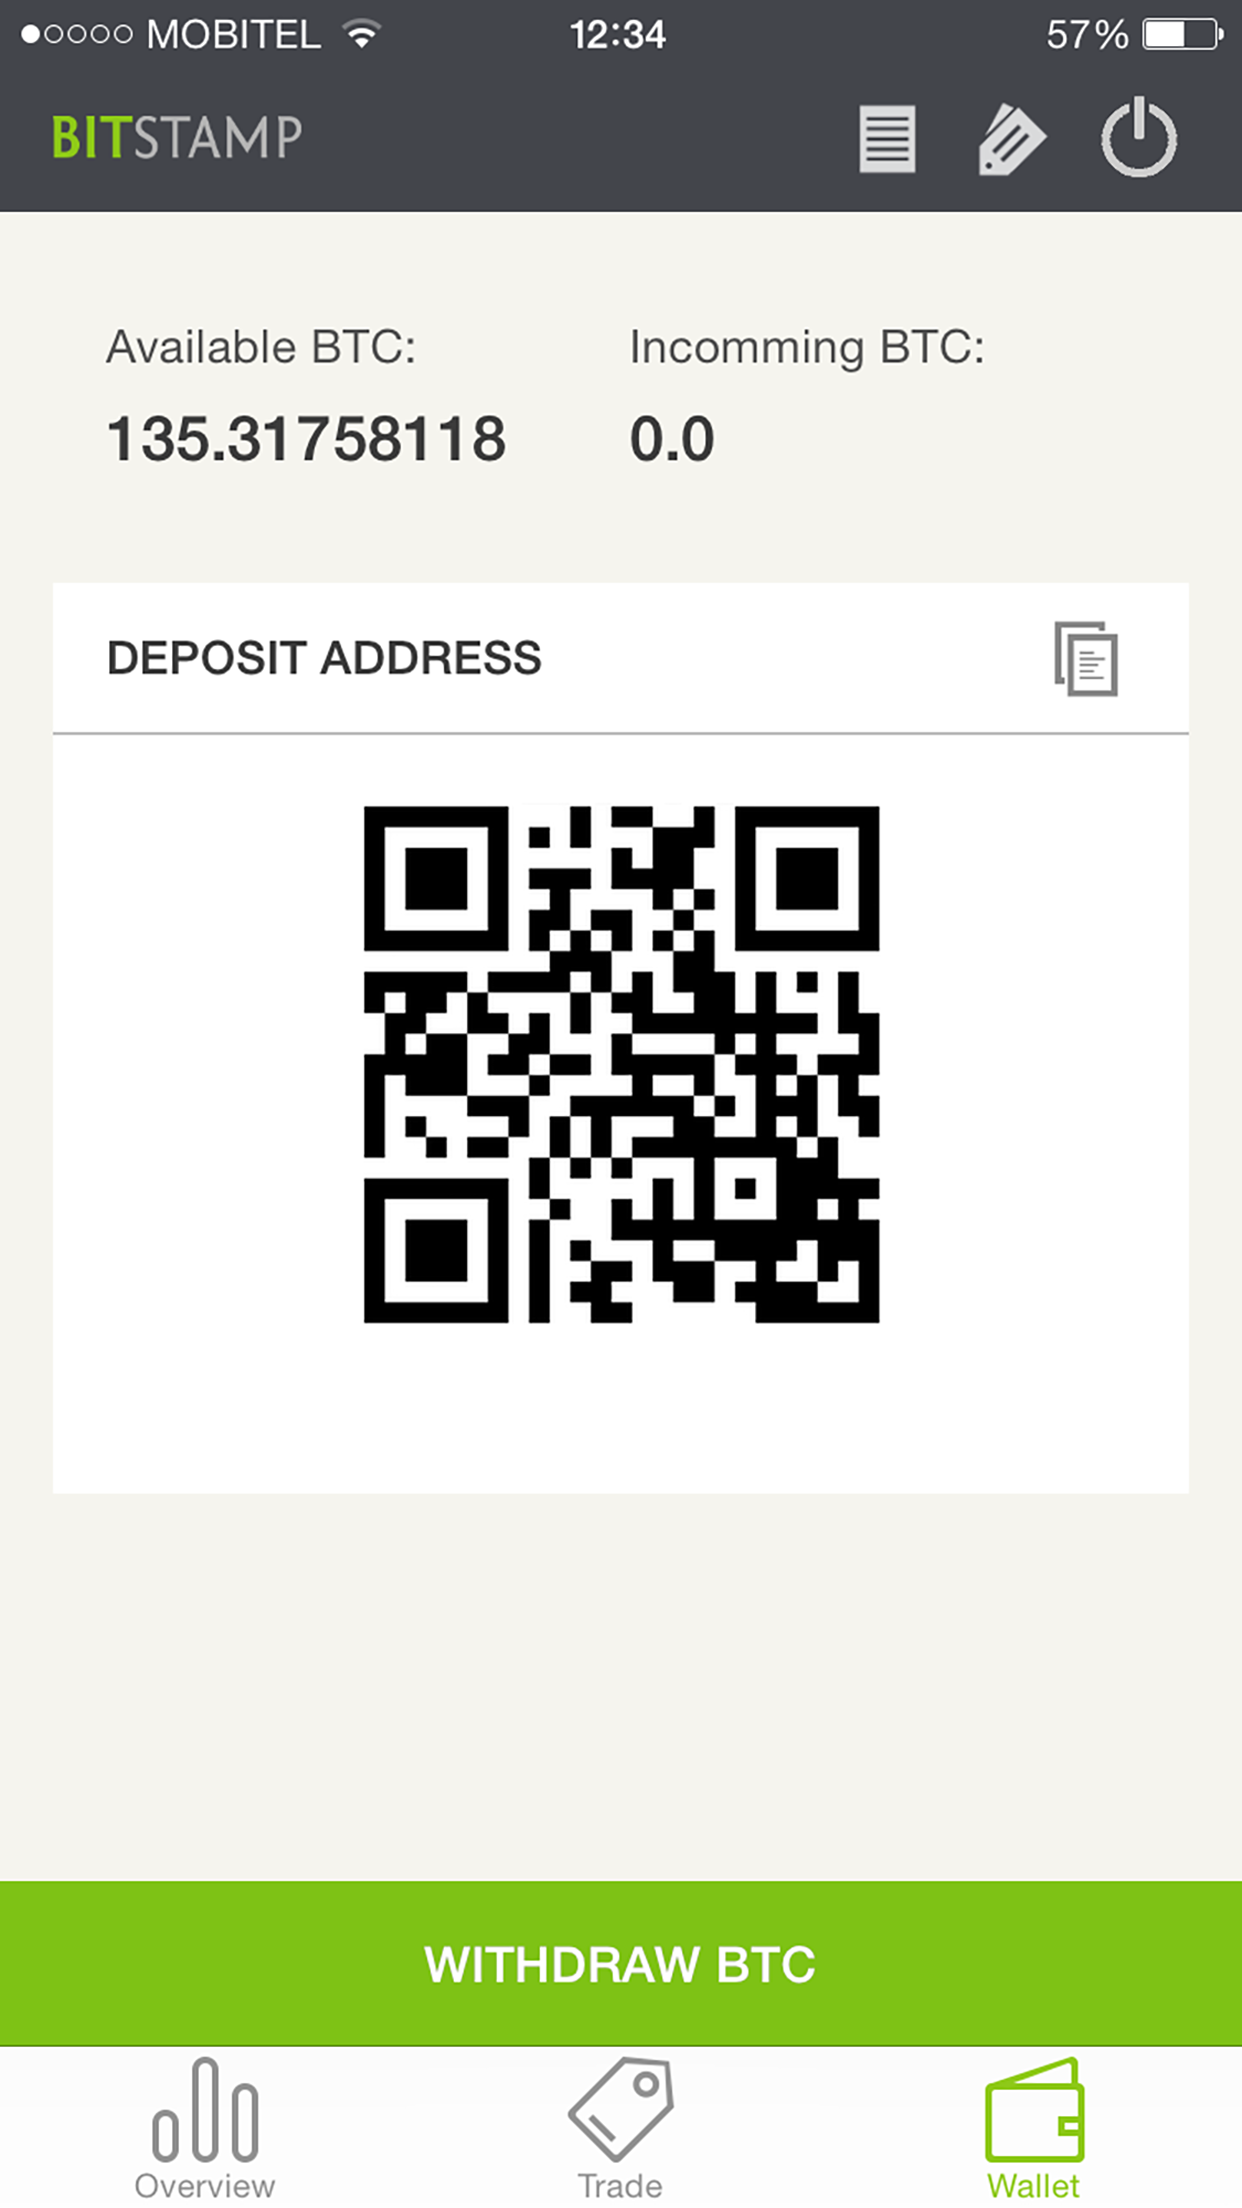 what is the bitstamp app desired pin